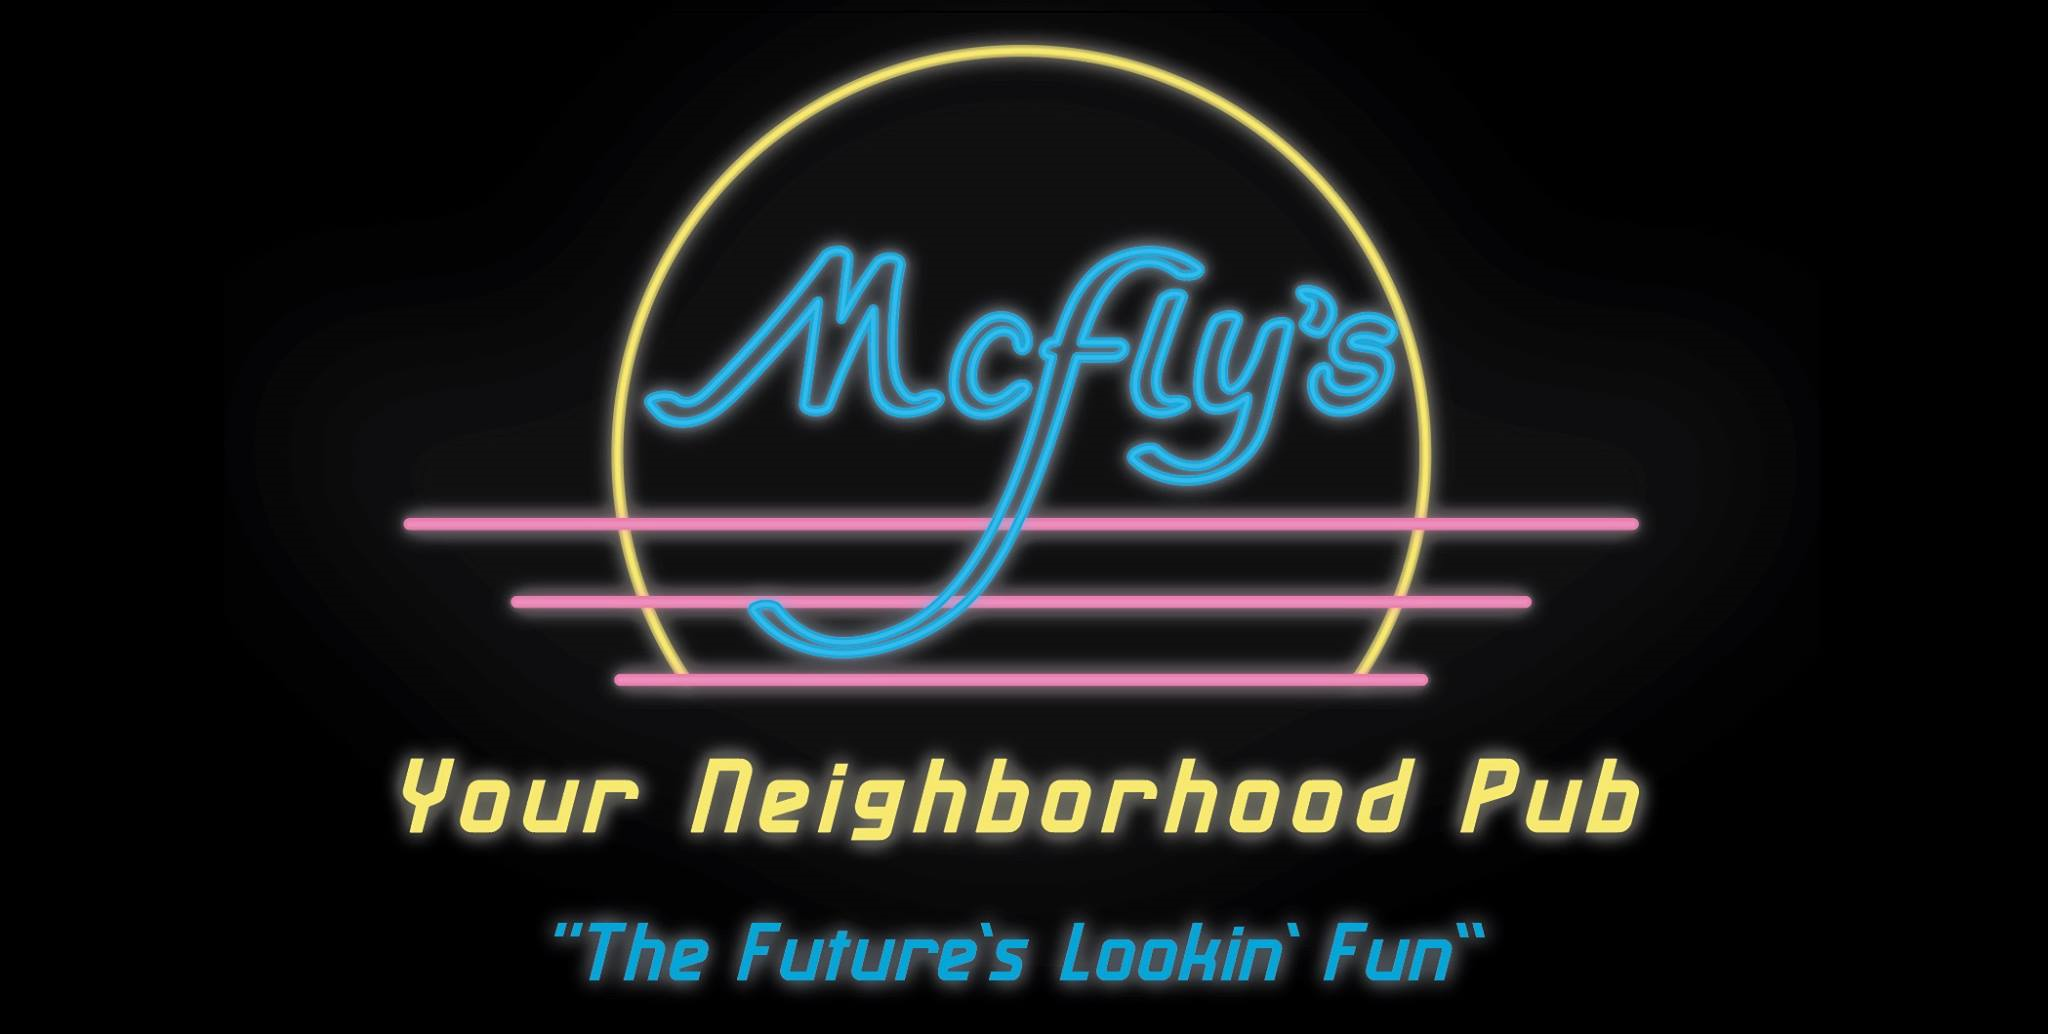 McFly's - Ft. Worth